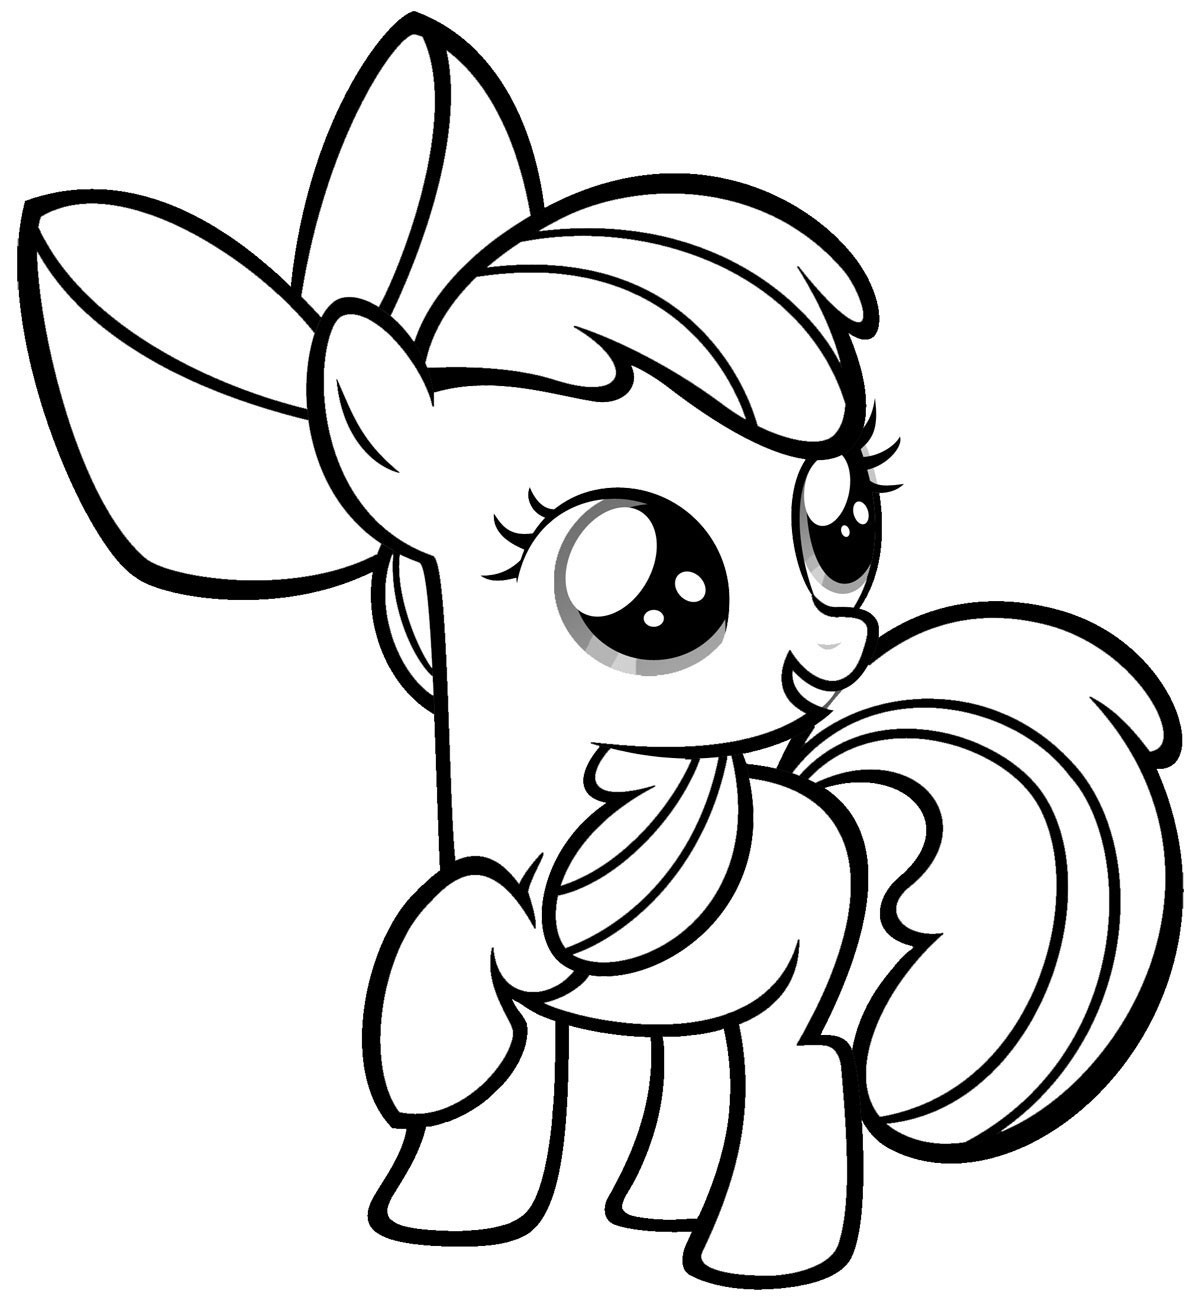 Coloring Pages My Little Pony
 Free Printable My Little Pony Coloring Pages For Kids